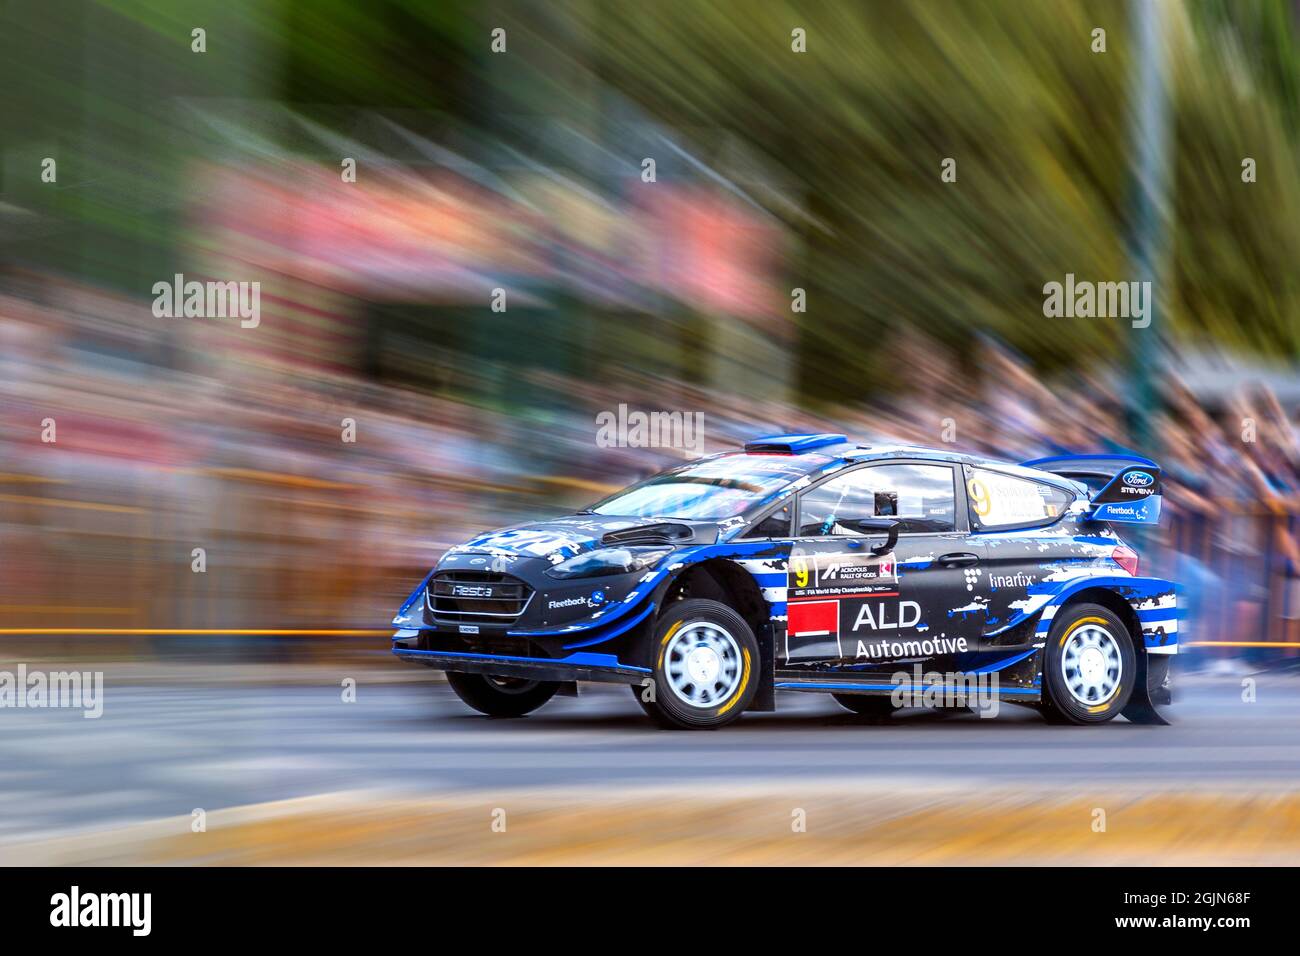 Racing car Ford Fiesta WRC during the first stage of Rally Acropolis 2021, held in Athens, Greece, also called 'The Rally of Gods'. Stock Photo